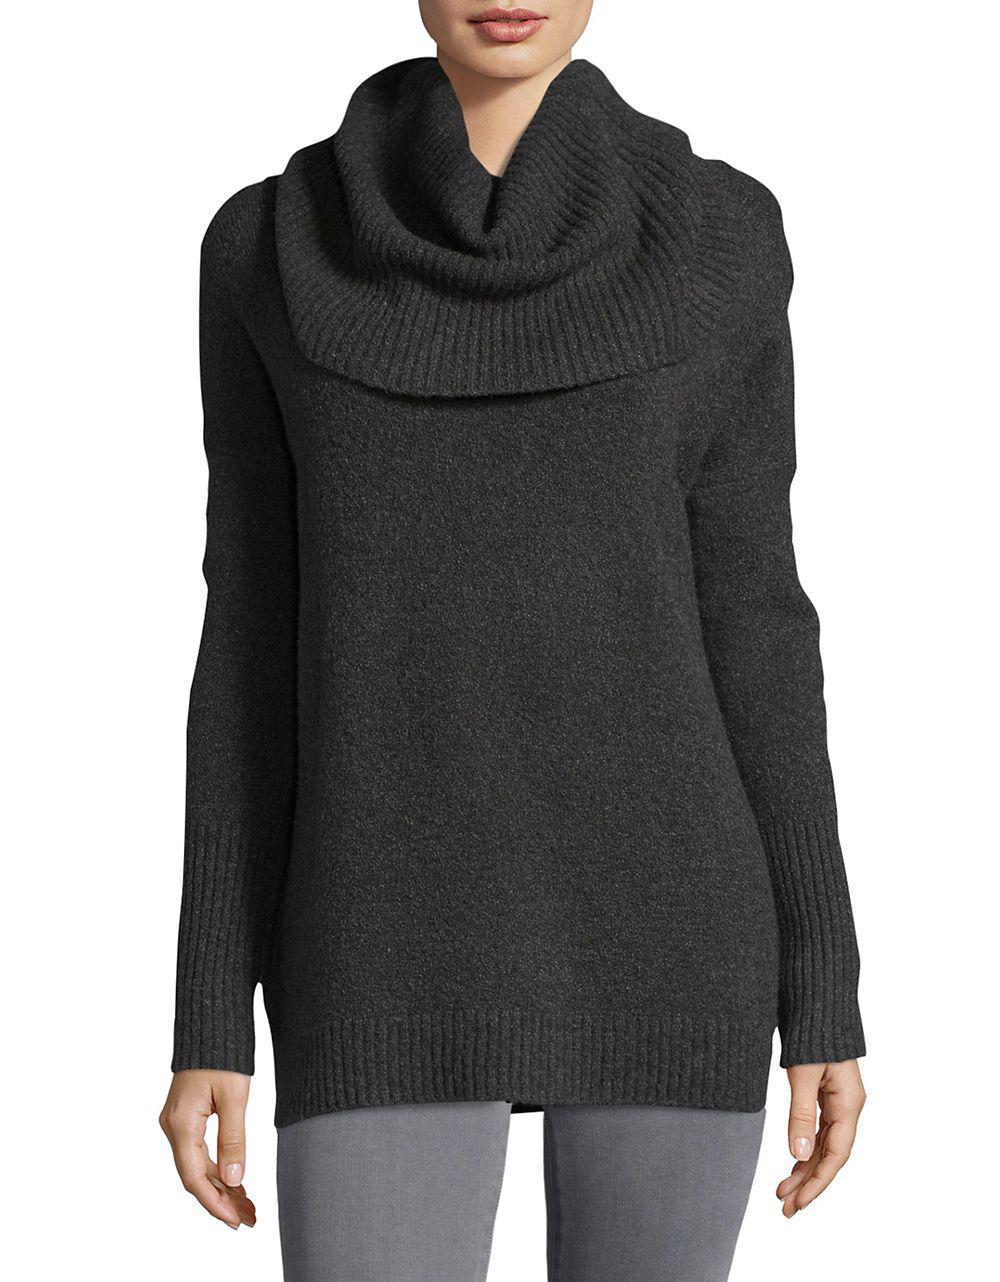 French connection Textured Cowlneck Sweater in Gray | Lyst